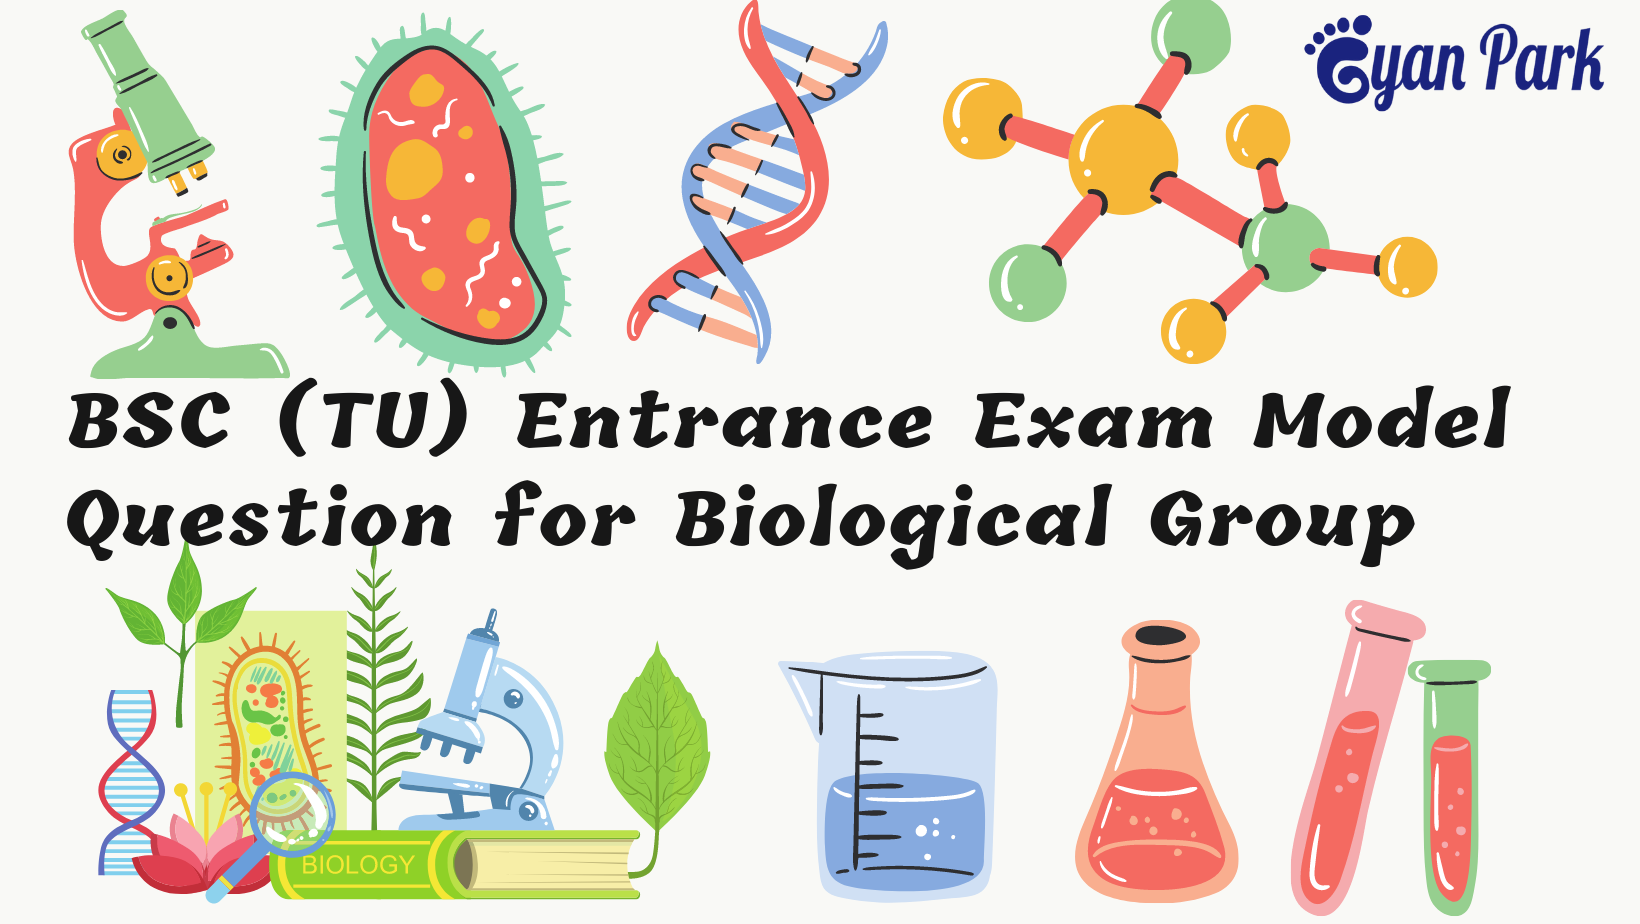 BSC (TU) Entrance Exam Model Question for Biological Group